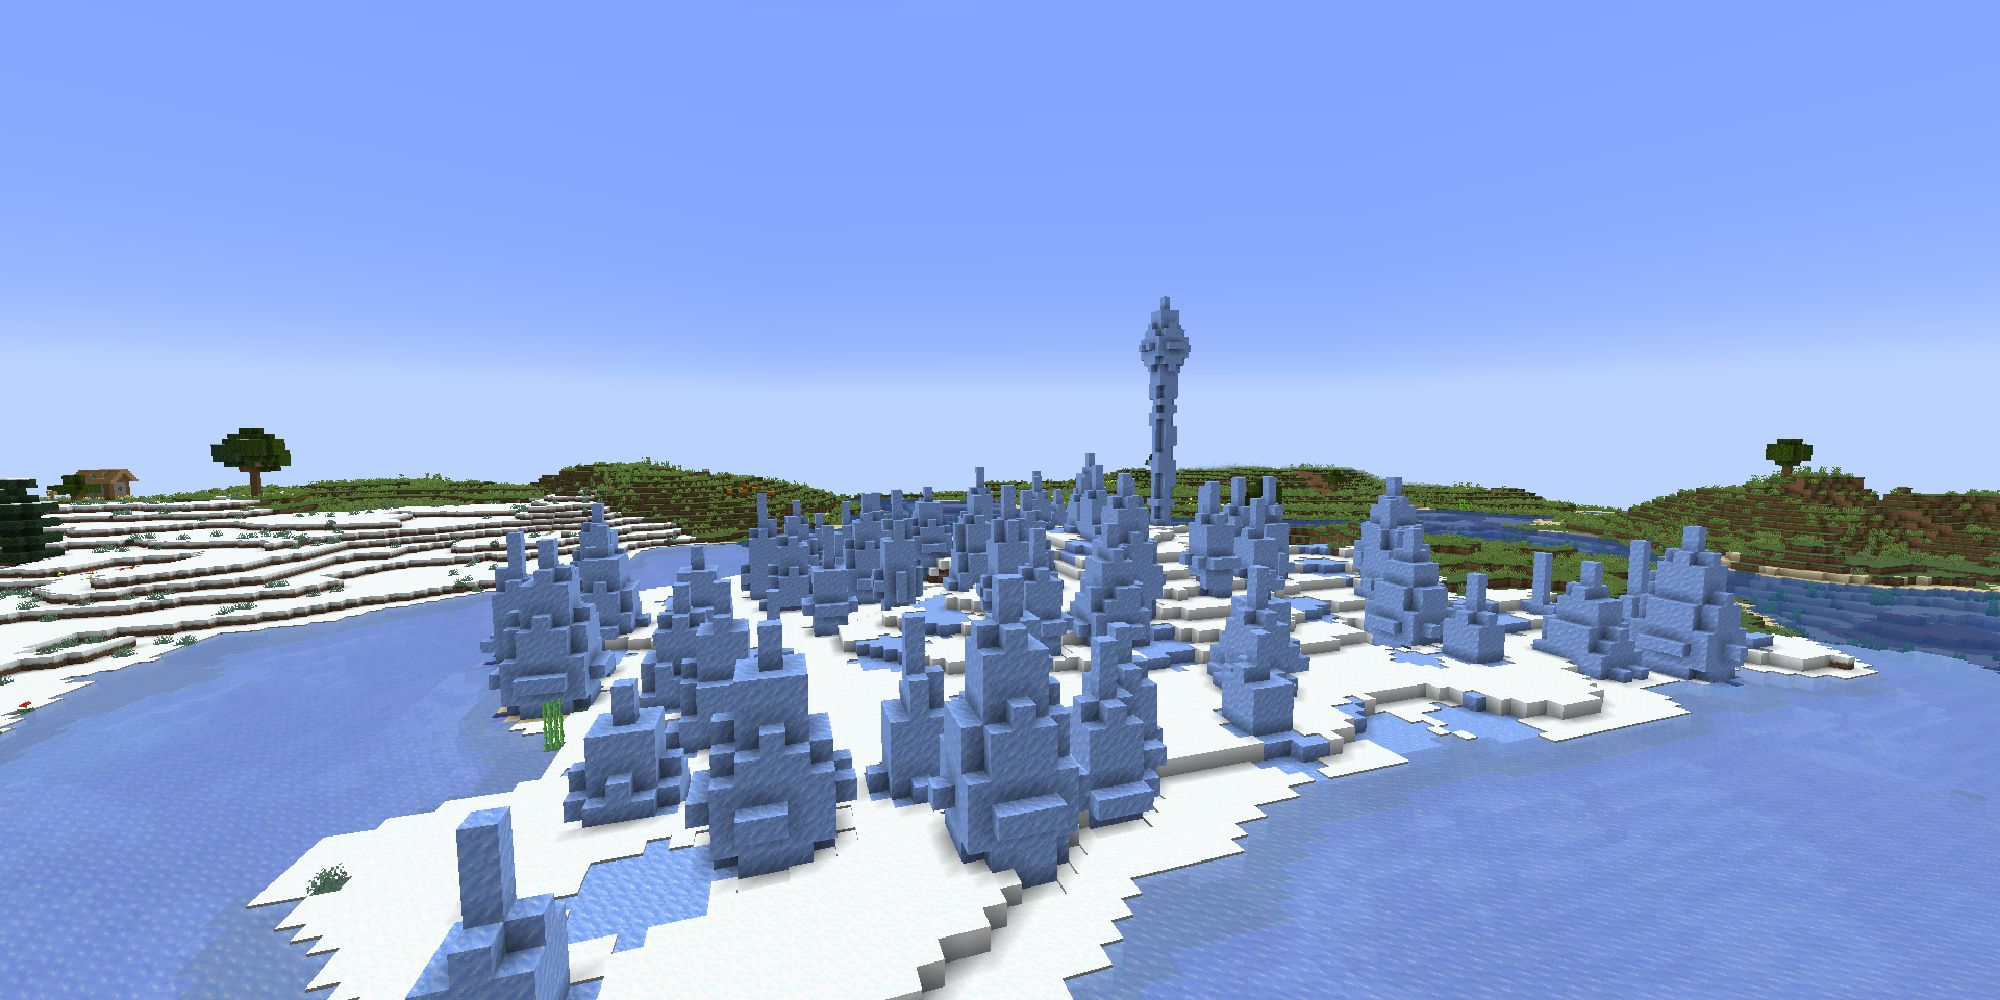 ice spikes biome from above